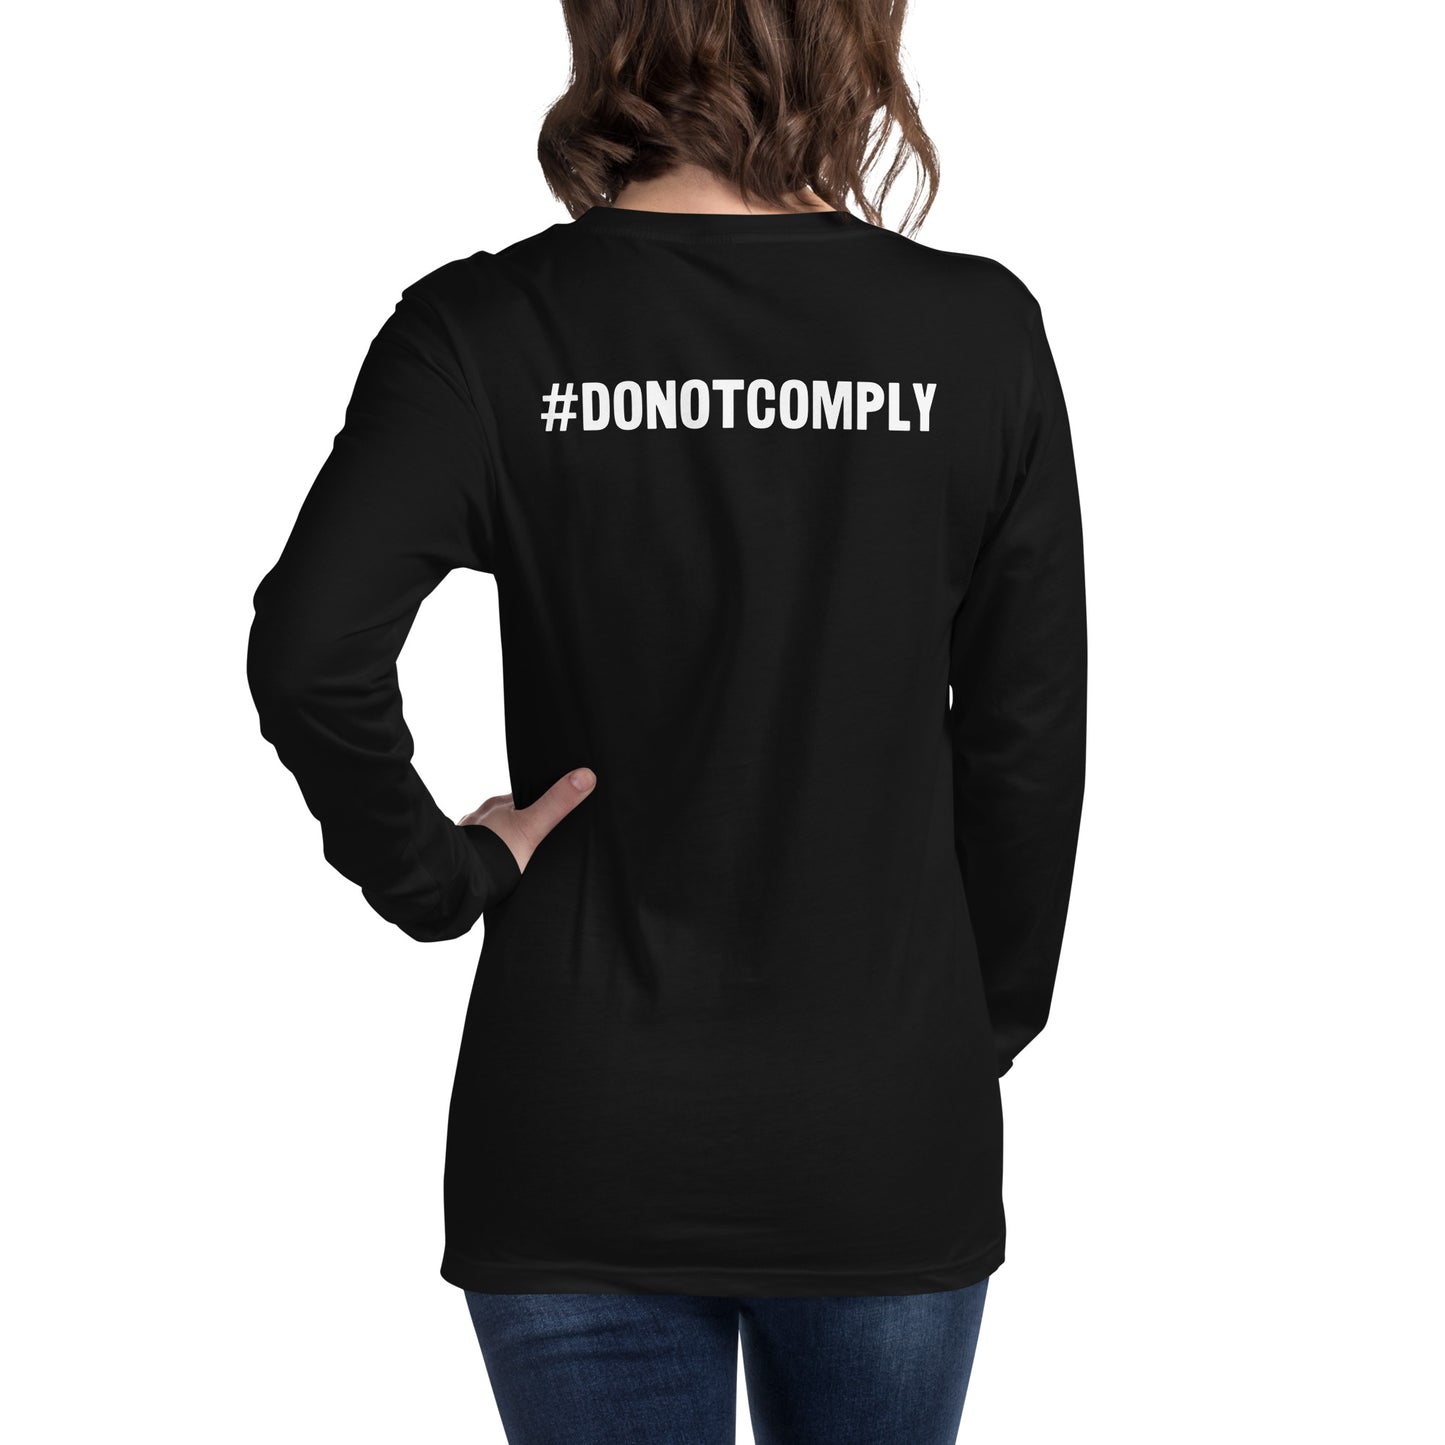 DTM DC Unisex Long Sleeve Tee with #DONOTCOMPLY back